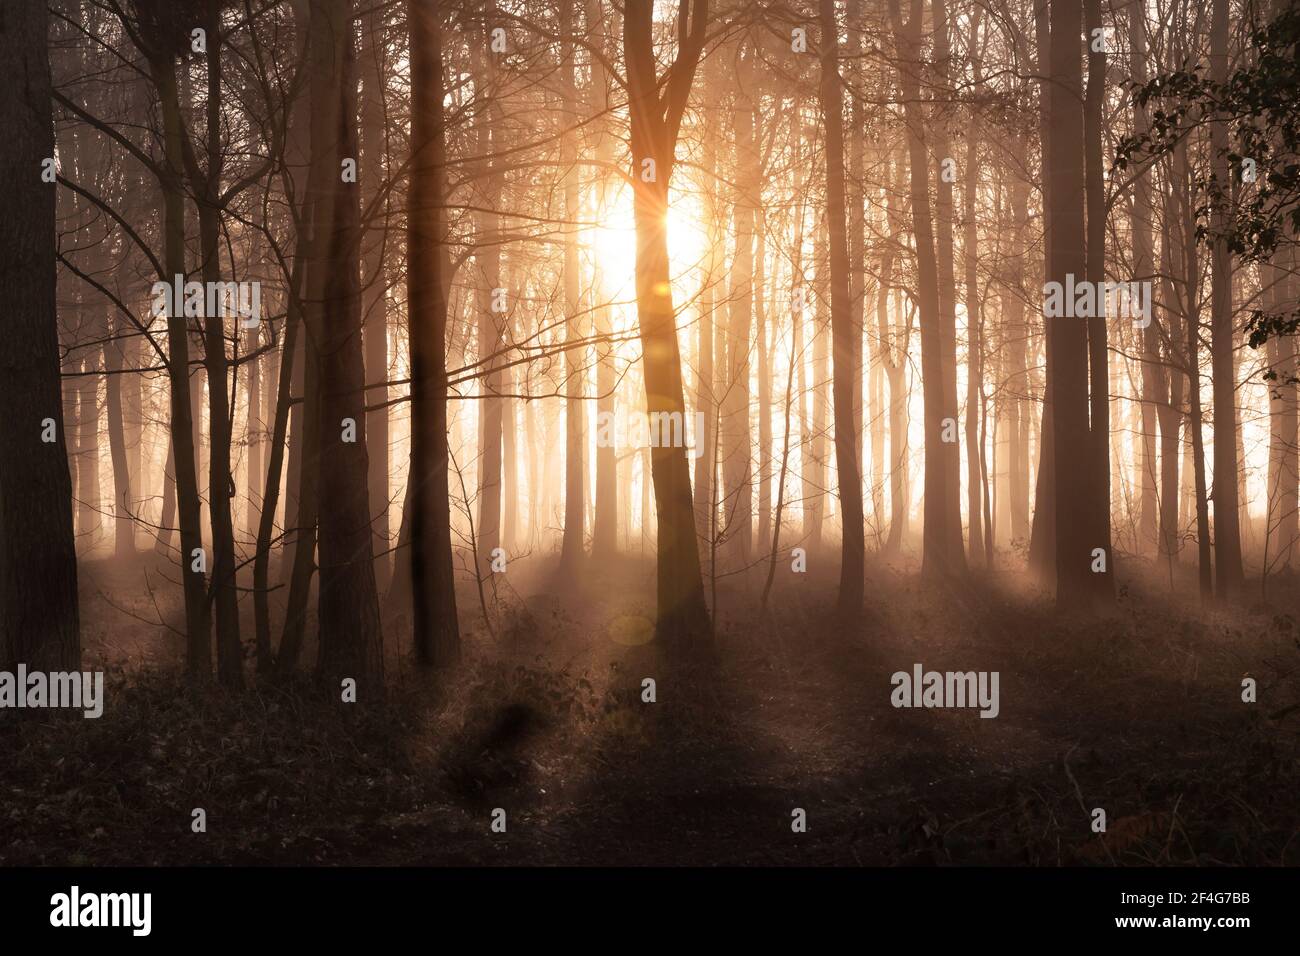 Stunning forest in dawn sunrise and mist. Orange glowing sun and rays with tree shadows. Norfolk England woodland in the early morning. Stock Photo